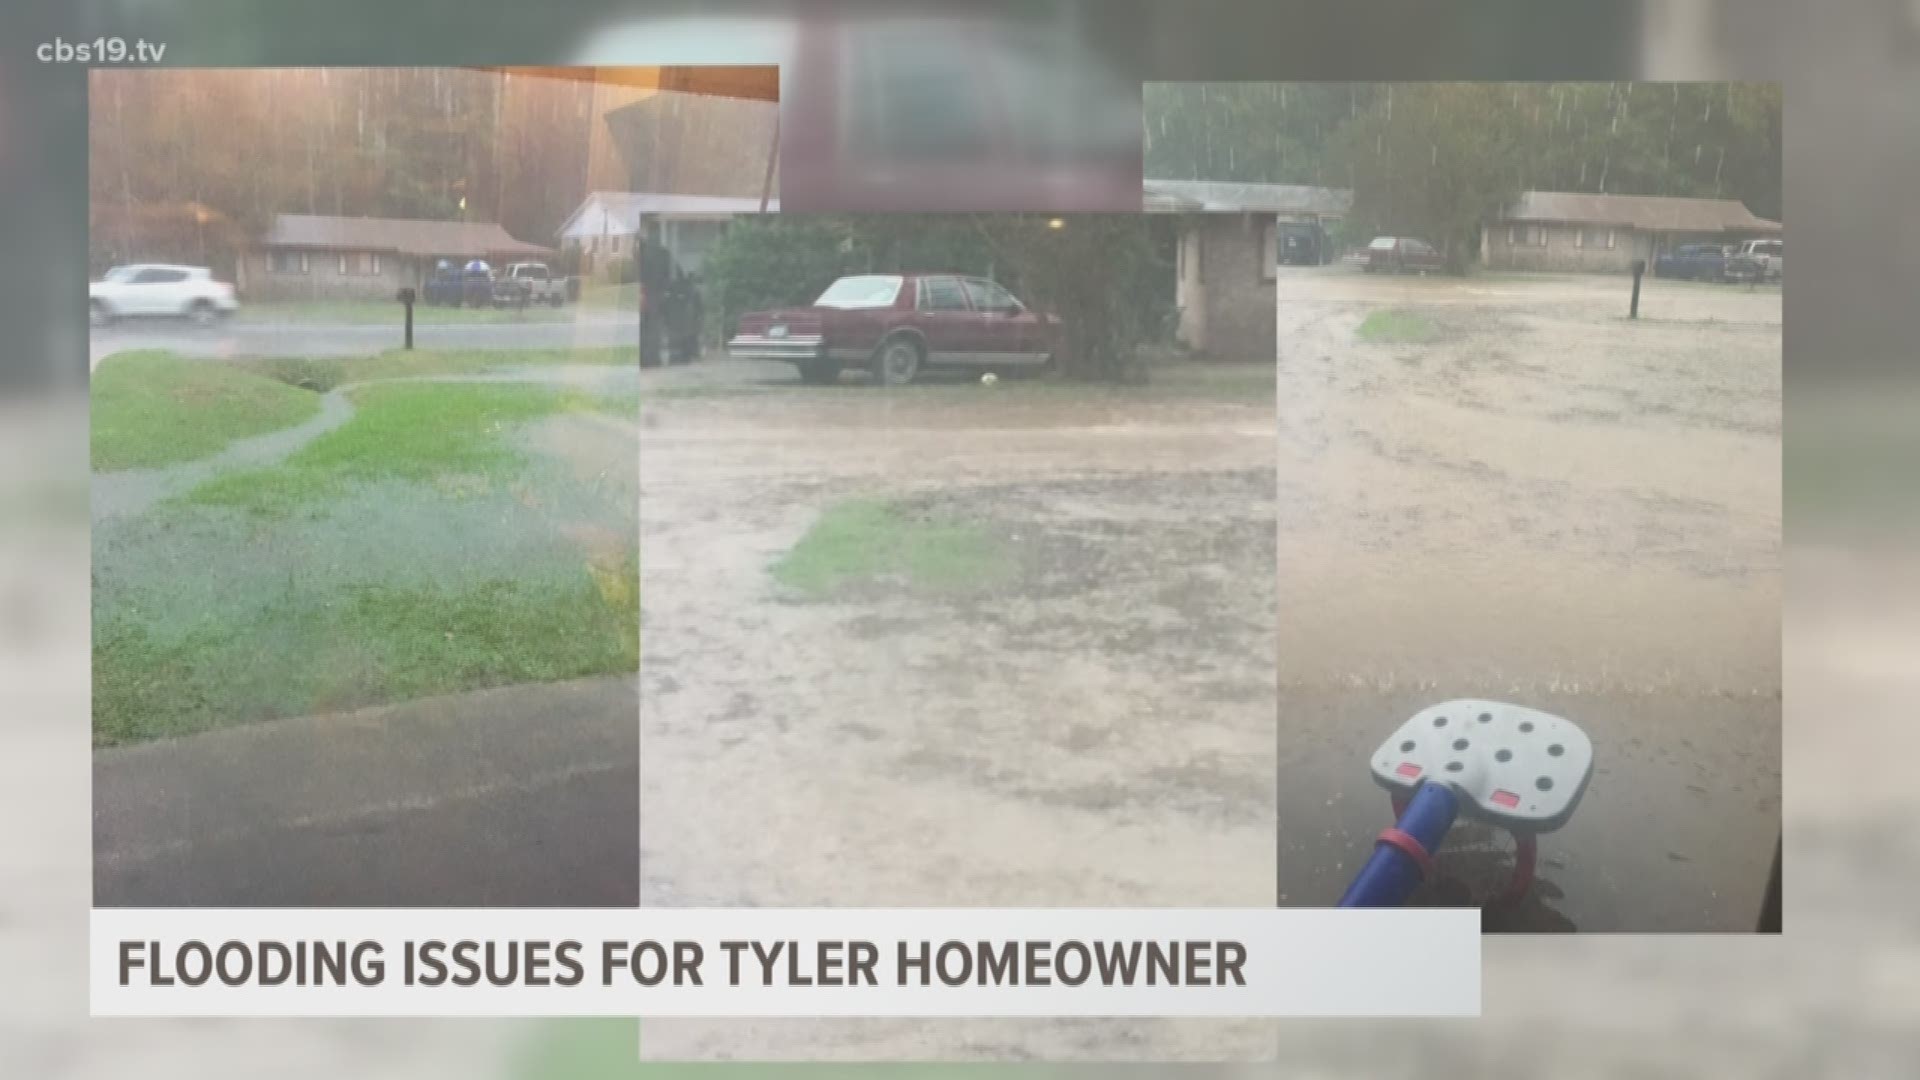 One Tyler family has endured years of flooding damage at their home. Now, short on patience and unable to safely live at the home, the family says something needs to be done to put an end to the problem.